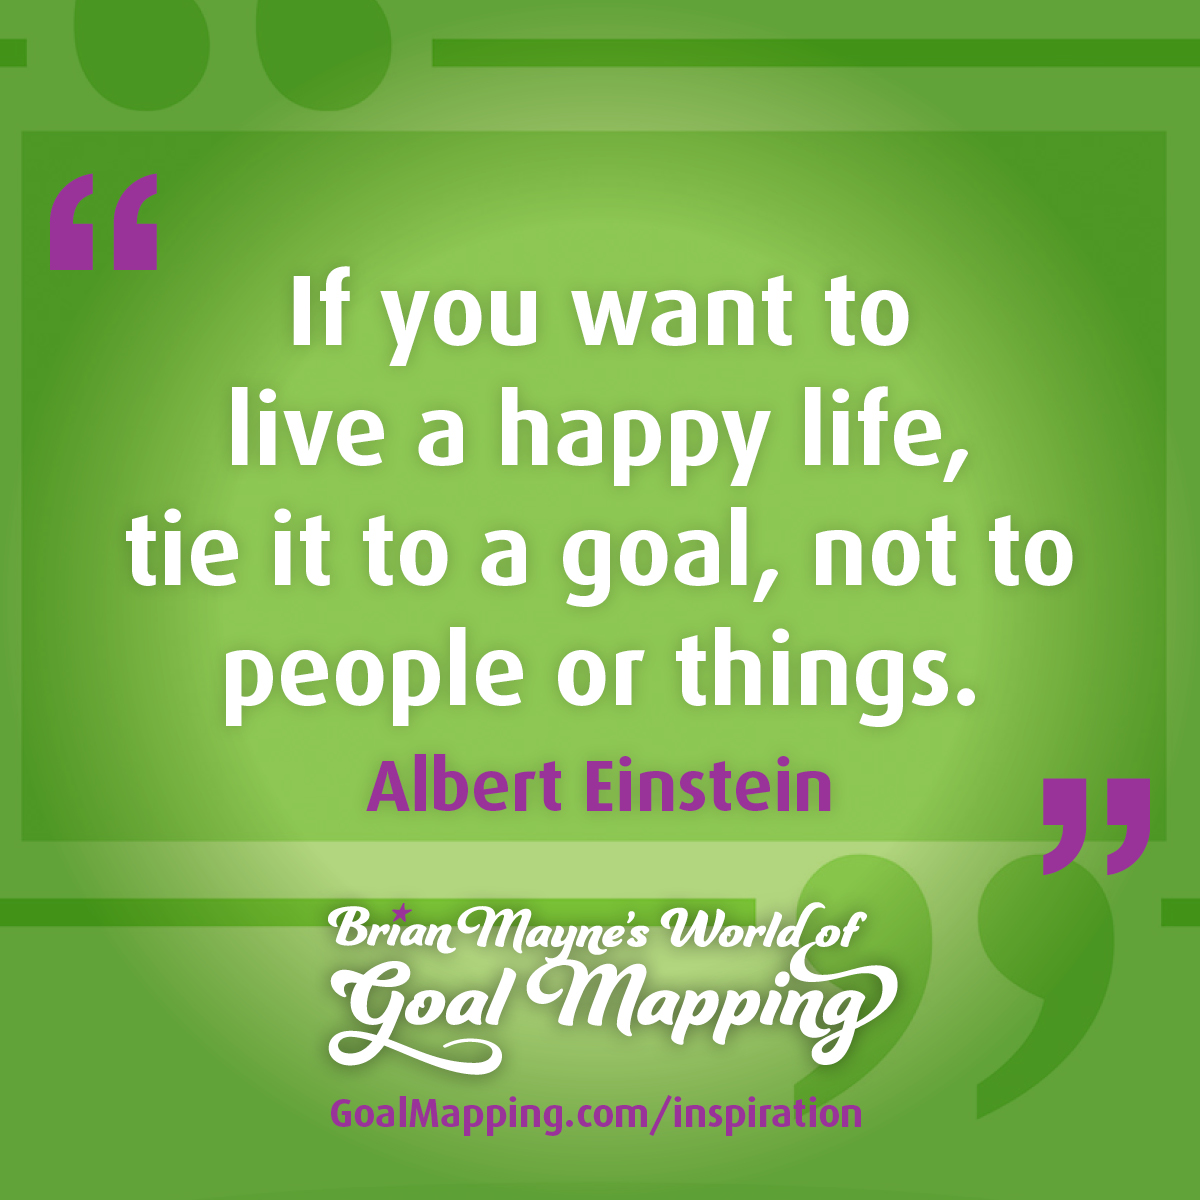 "If you want to live a happy life, tie it to a goal, not to people or things." Albert Einstein